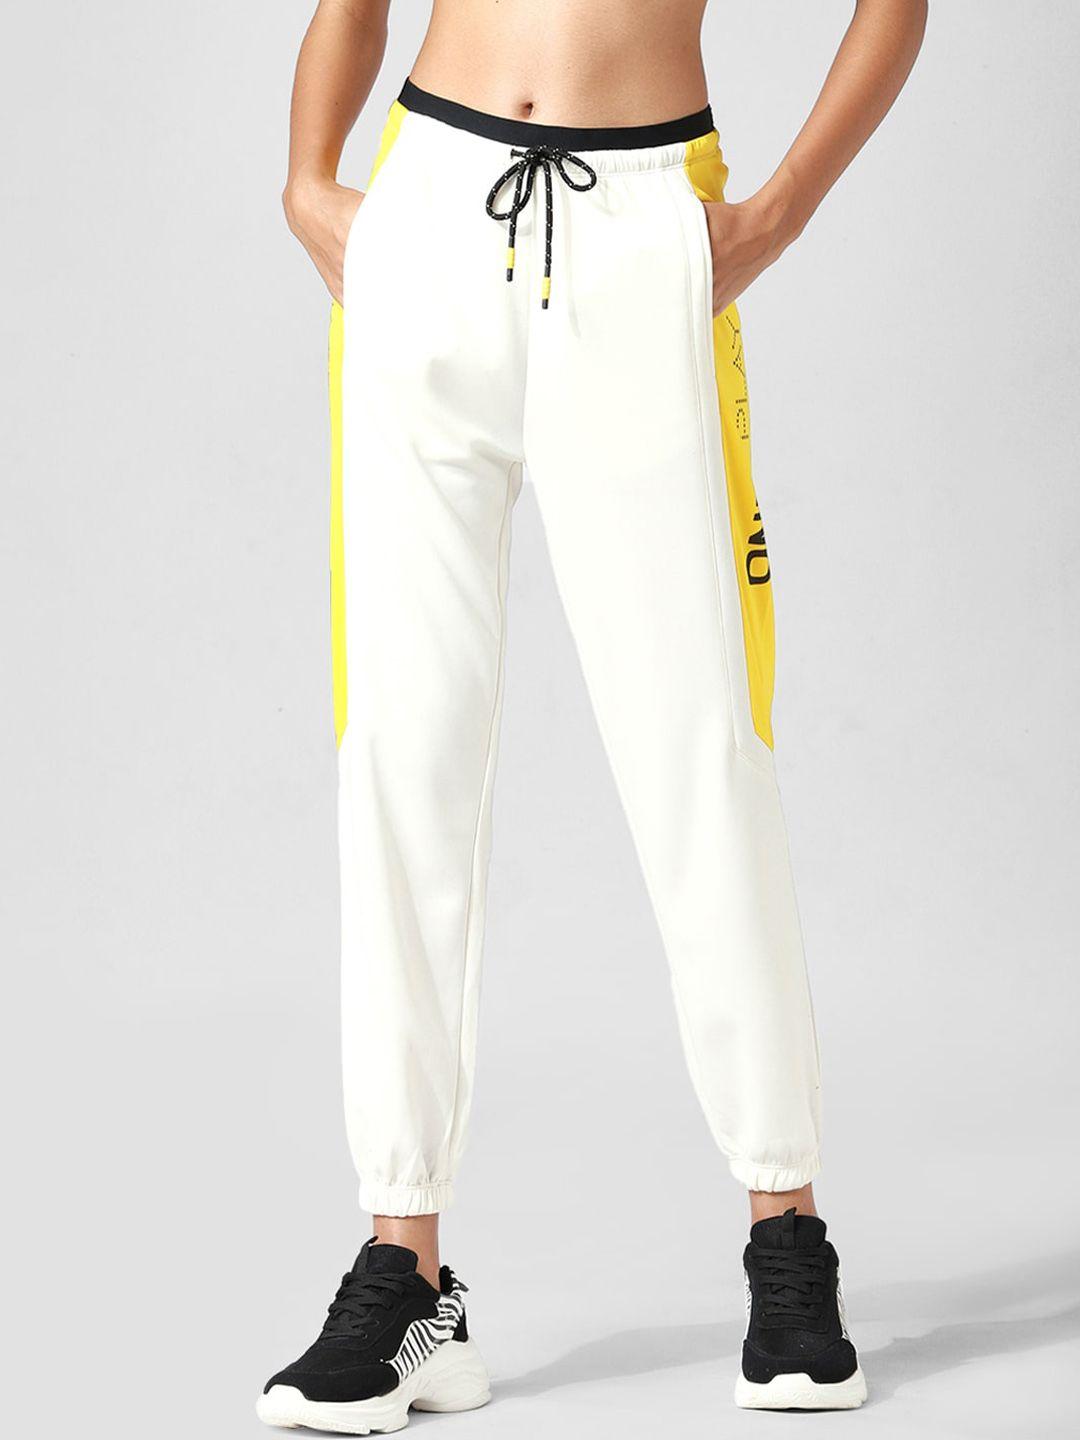 only-play-women-white-&-yellow-graphic-printed-joggers-onlpfreddy-joggers-pnt